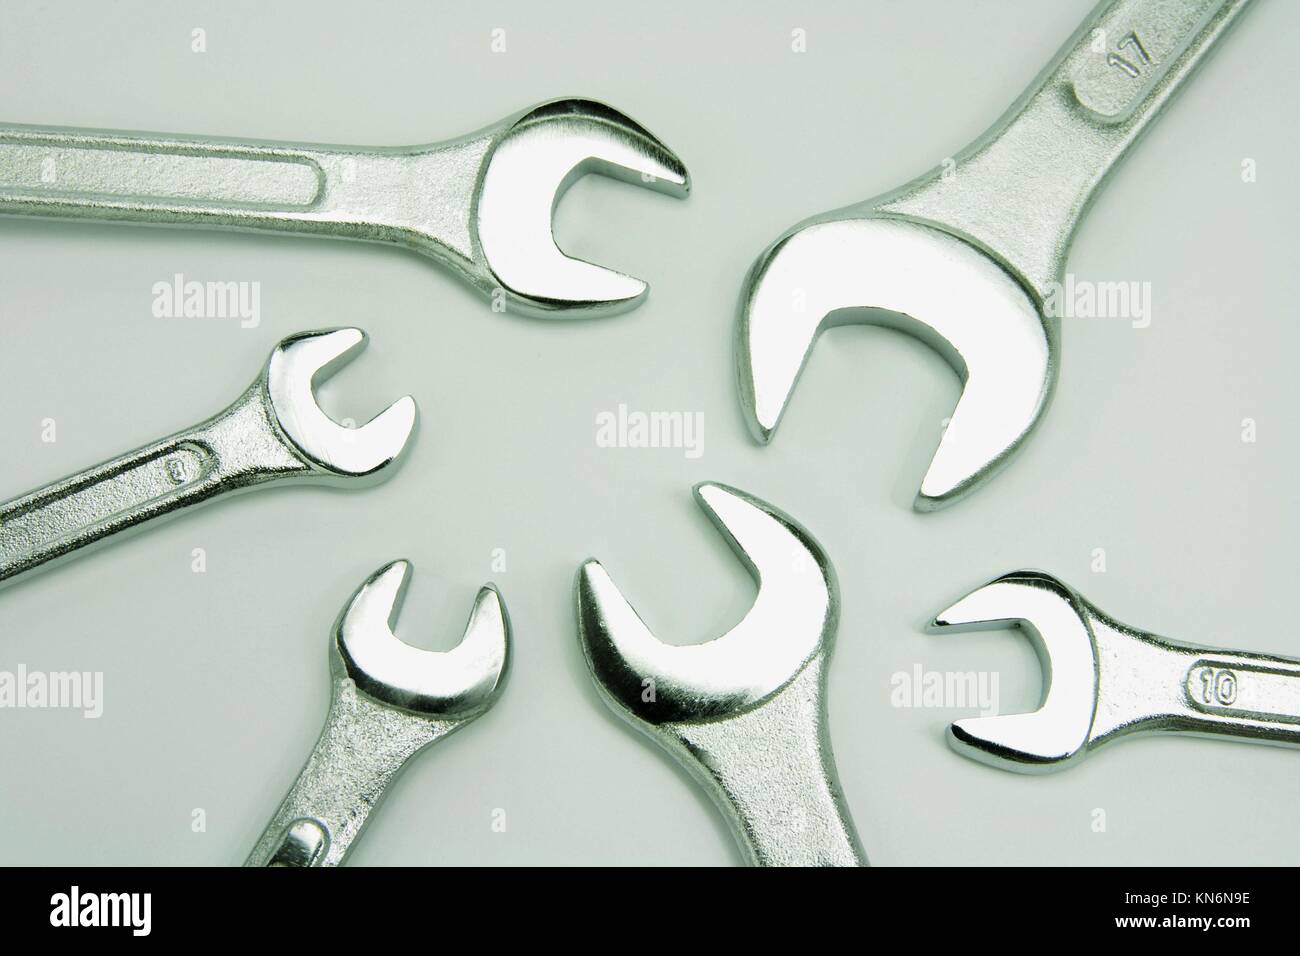 Wrenches. Stock Photo